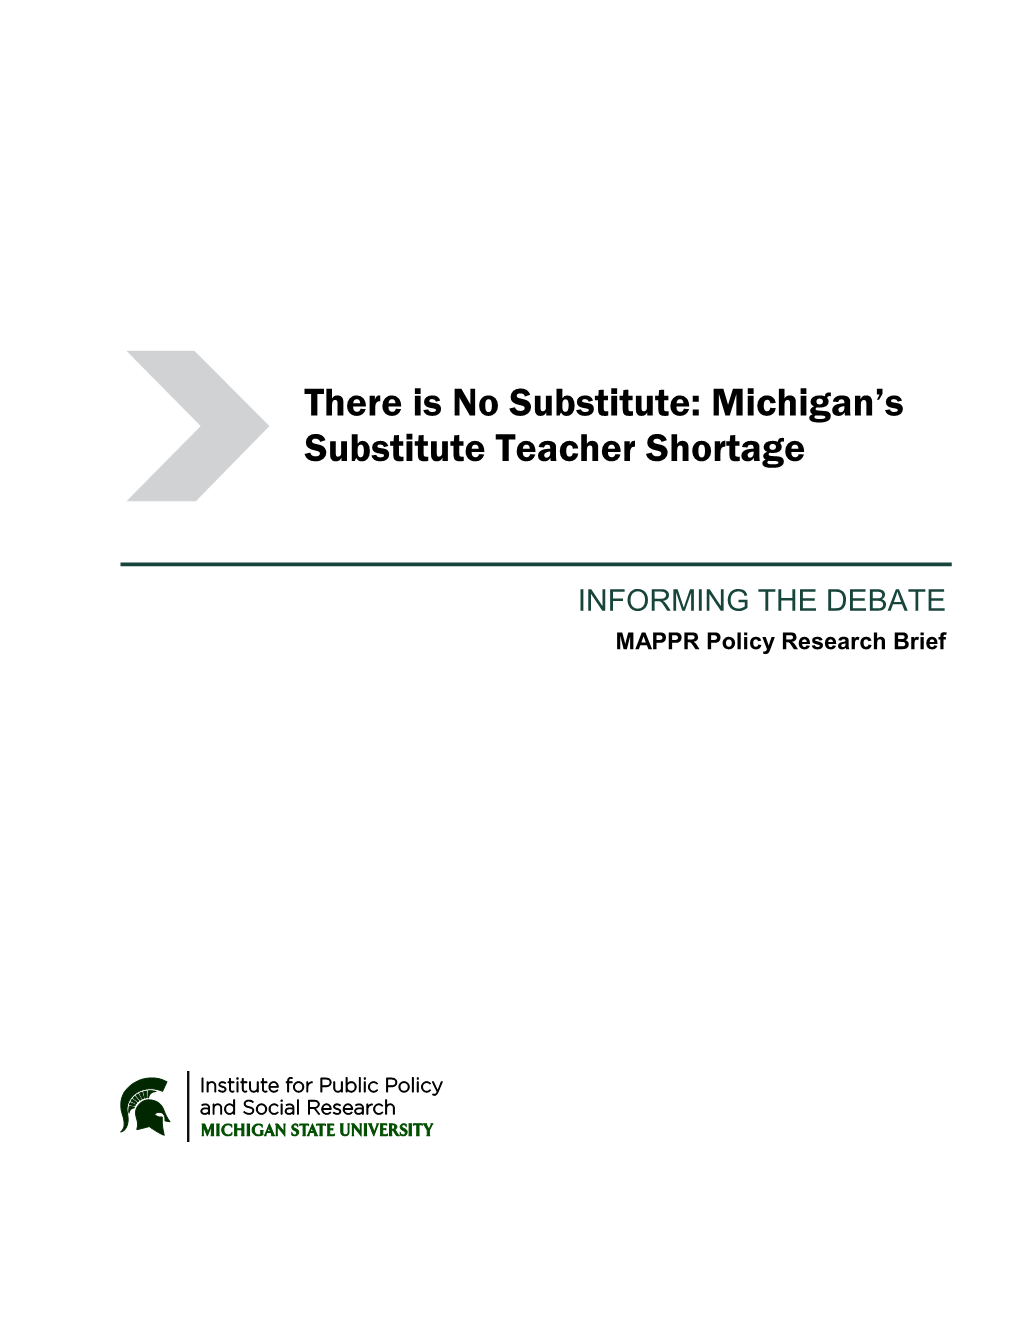 There Is No Substitute: Michigan's Substitute Teacher Shortage